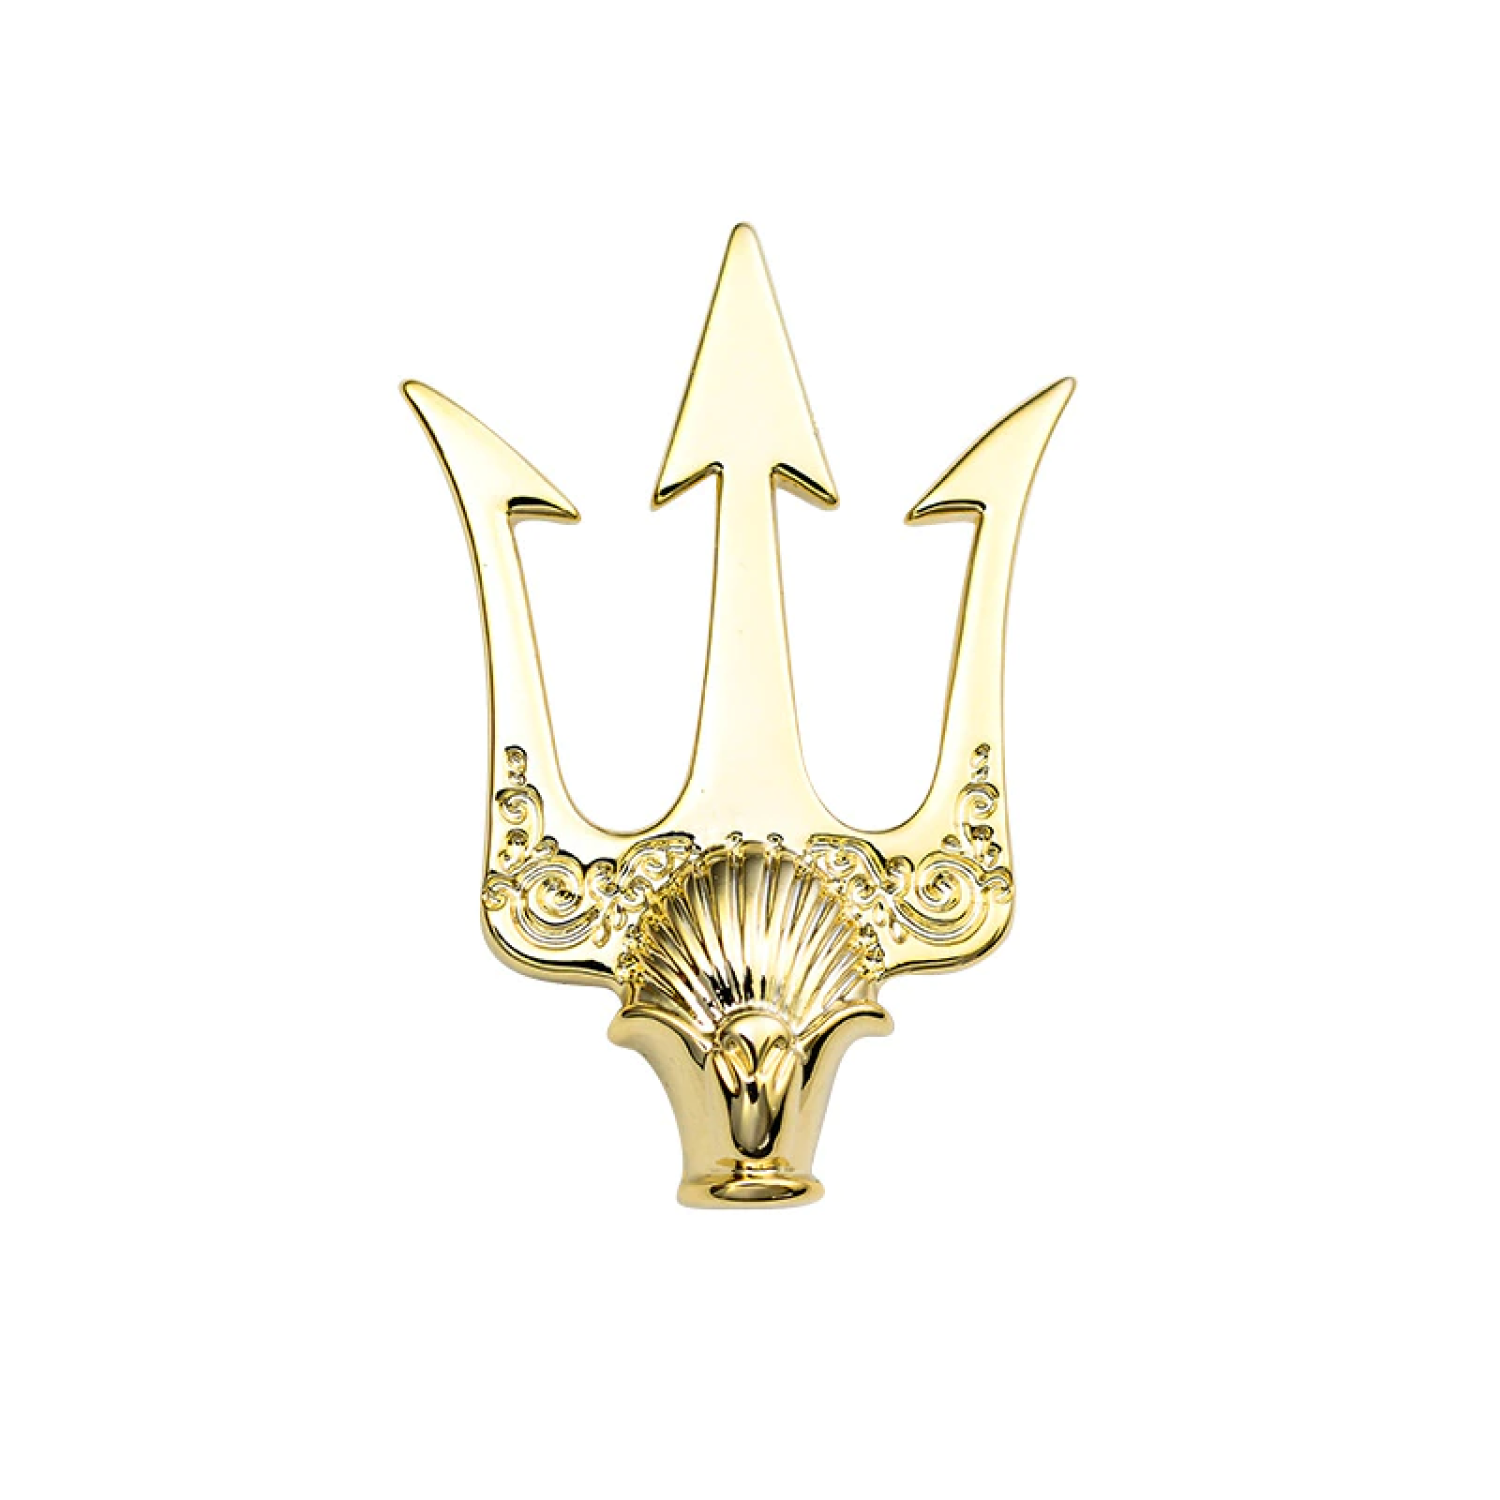 Main View: A Large Gold Colored Trident Shaped Lapel Pin